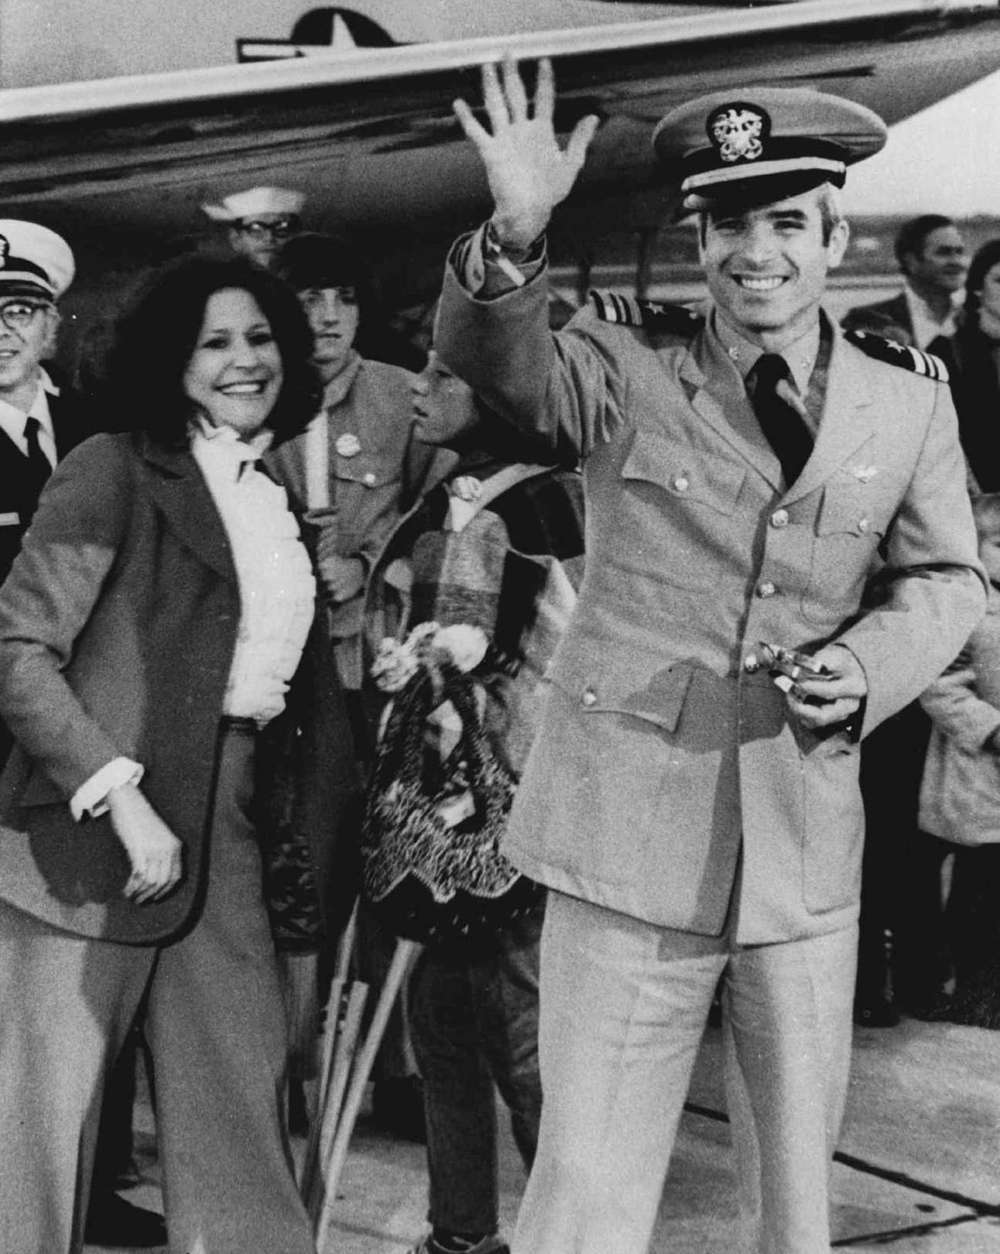 Lt. Commander John S. McCain III, a POW for over five years, waves to well wishers March 18, 1973 after arriving at Jacksonville Naval Air Station in Florida.  At left is his wife, and son Doug, who is on crutches after breaking his leg in a soccer game. McCain is the son of Adm. John S. McCain Jr, who commanded the U.S. Forces in the Pacific until his retirement. (AP Photo)